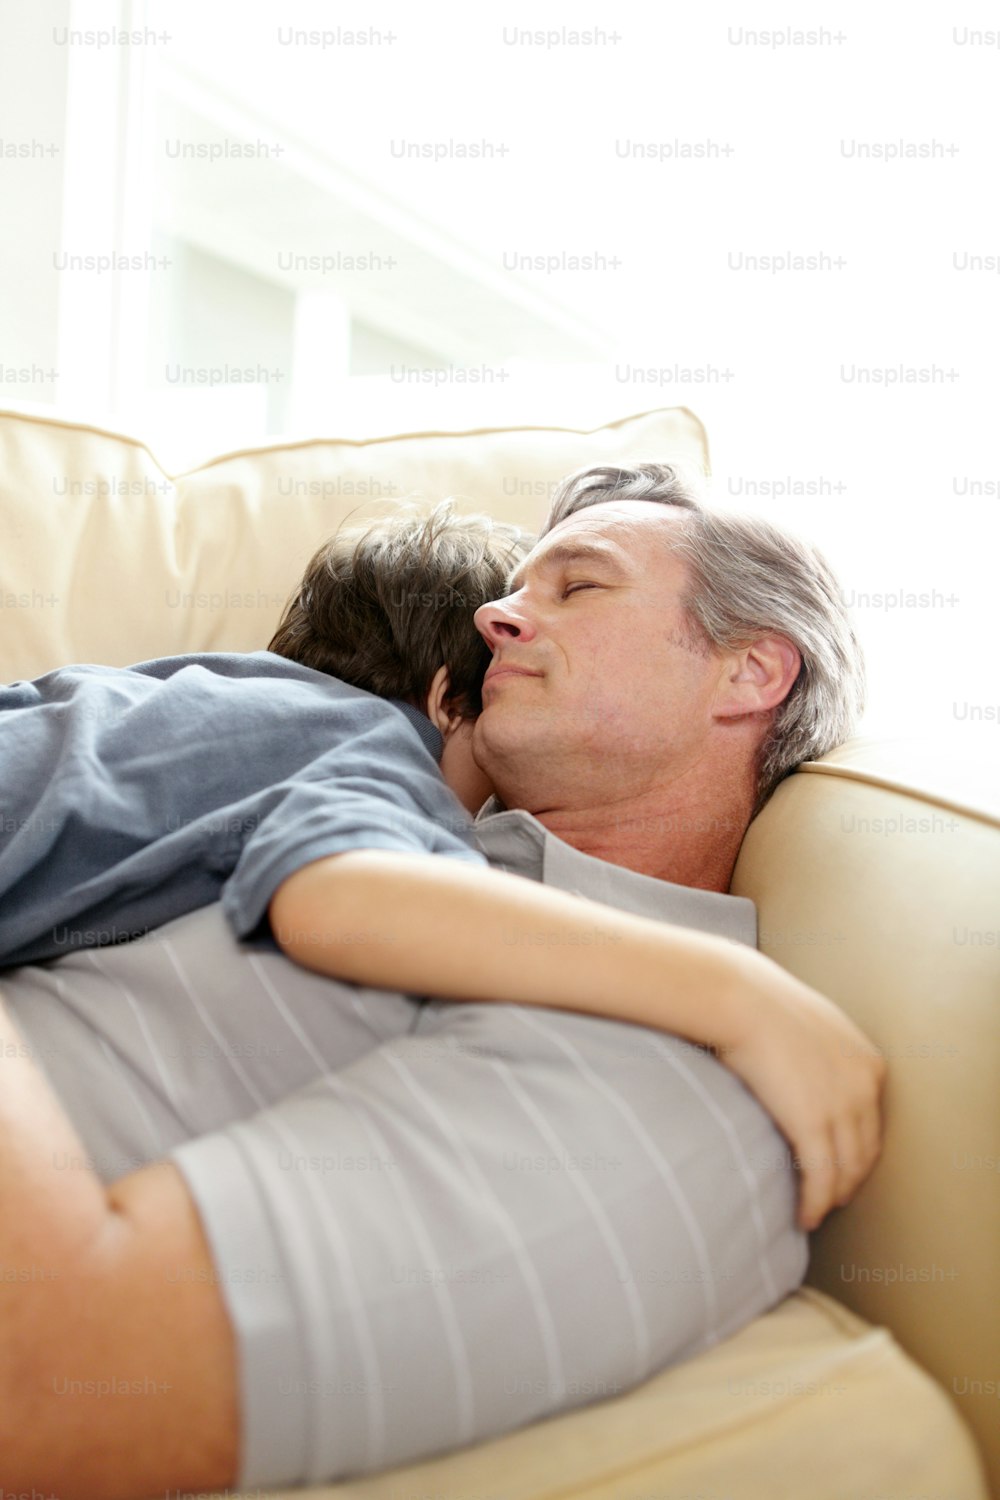 A father and son sleeping together on the lounge sofa after an active day